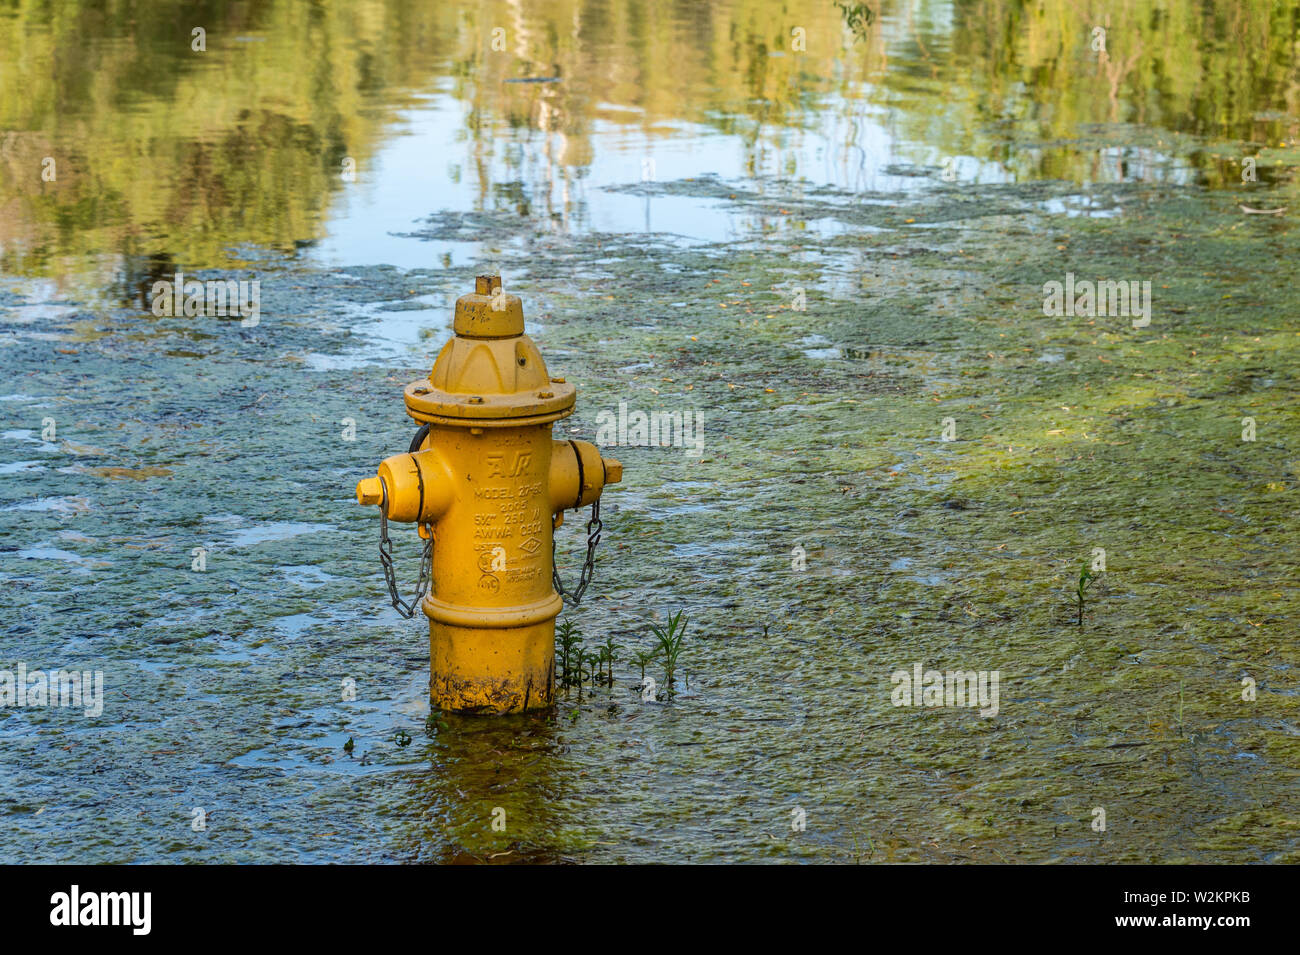 Toronto, CA - 22 June 2019: Yellow fire hydrant in the water during floods. Stock Photo